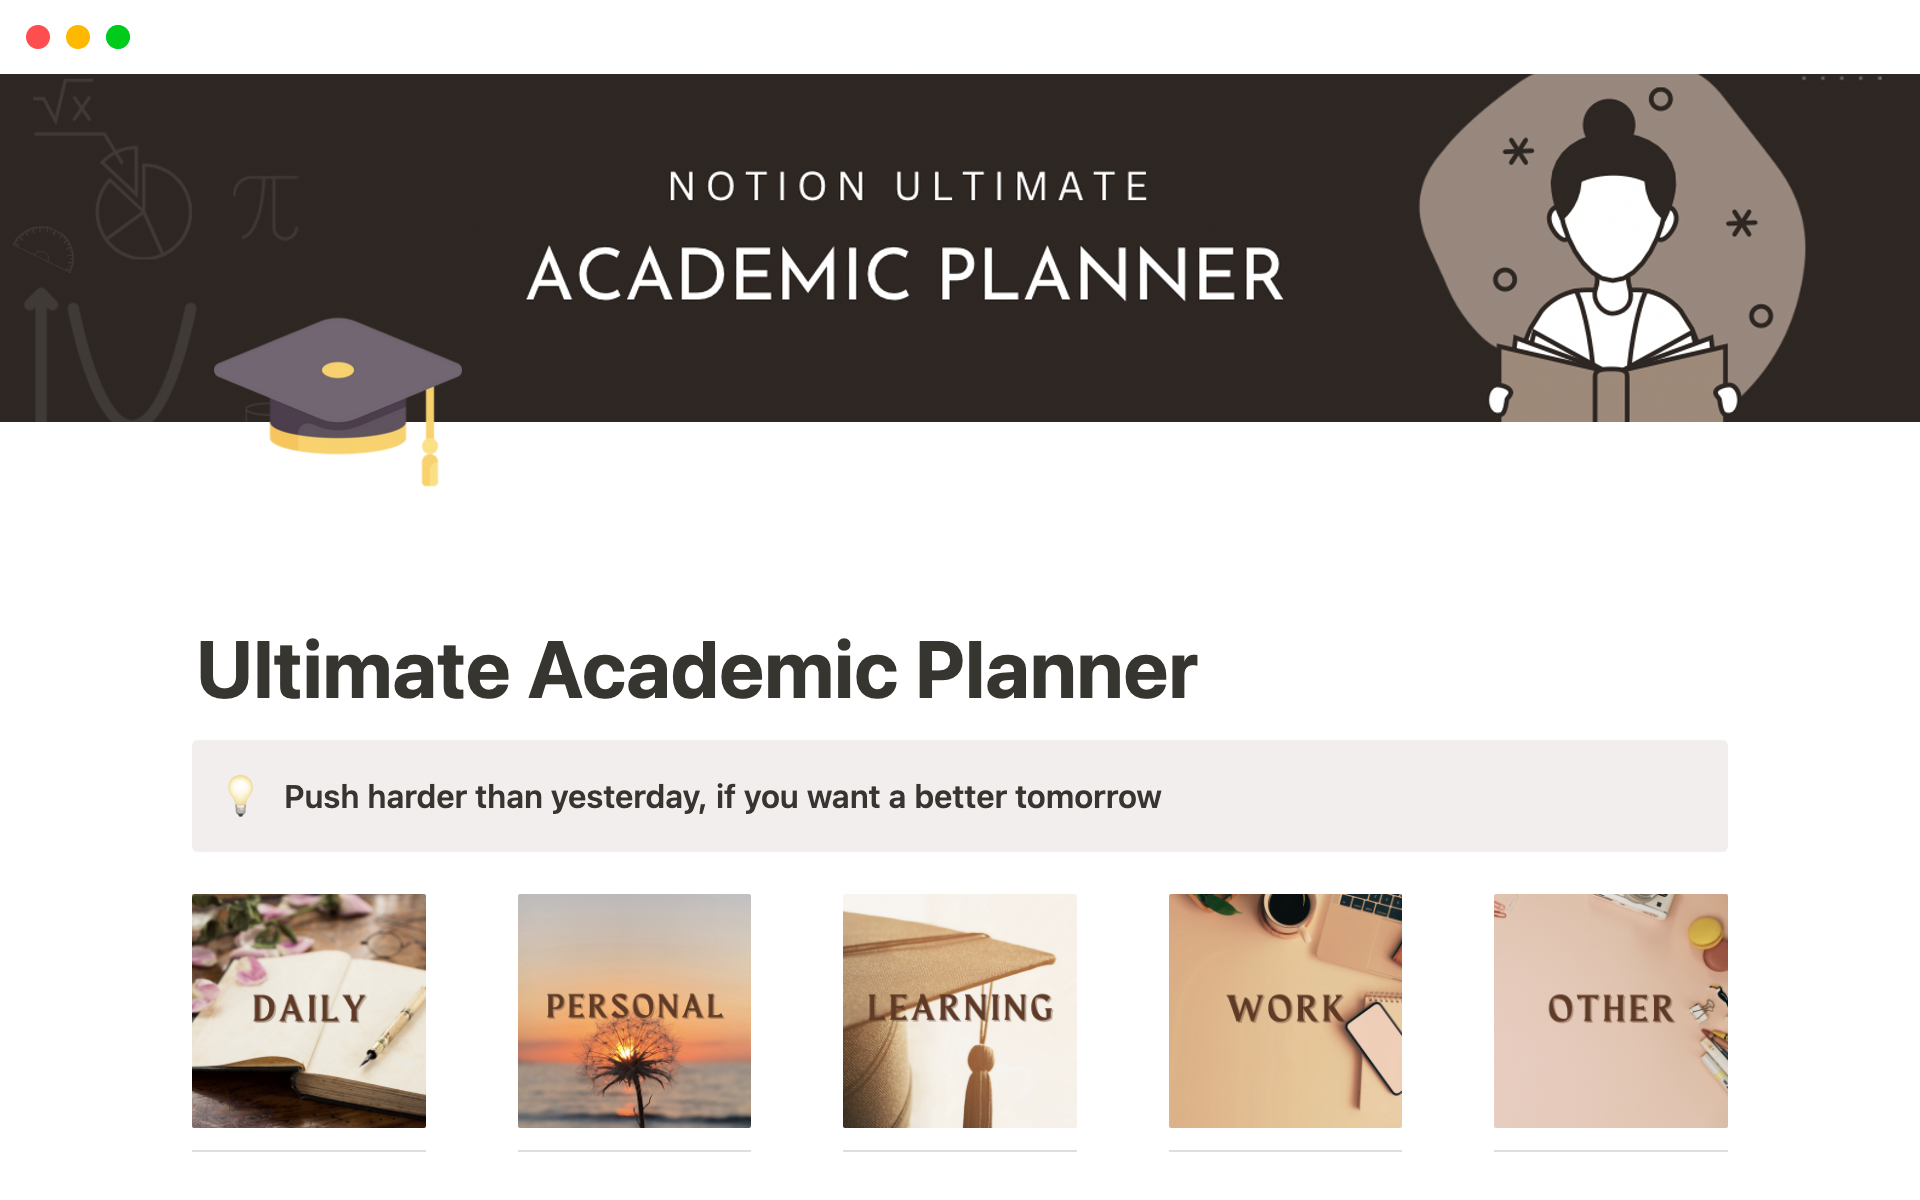 Organize your assignments,classes, projects, and to-dos with a thoughtfully-designed Notion Template made just for students.